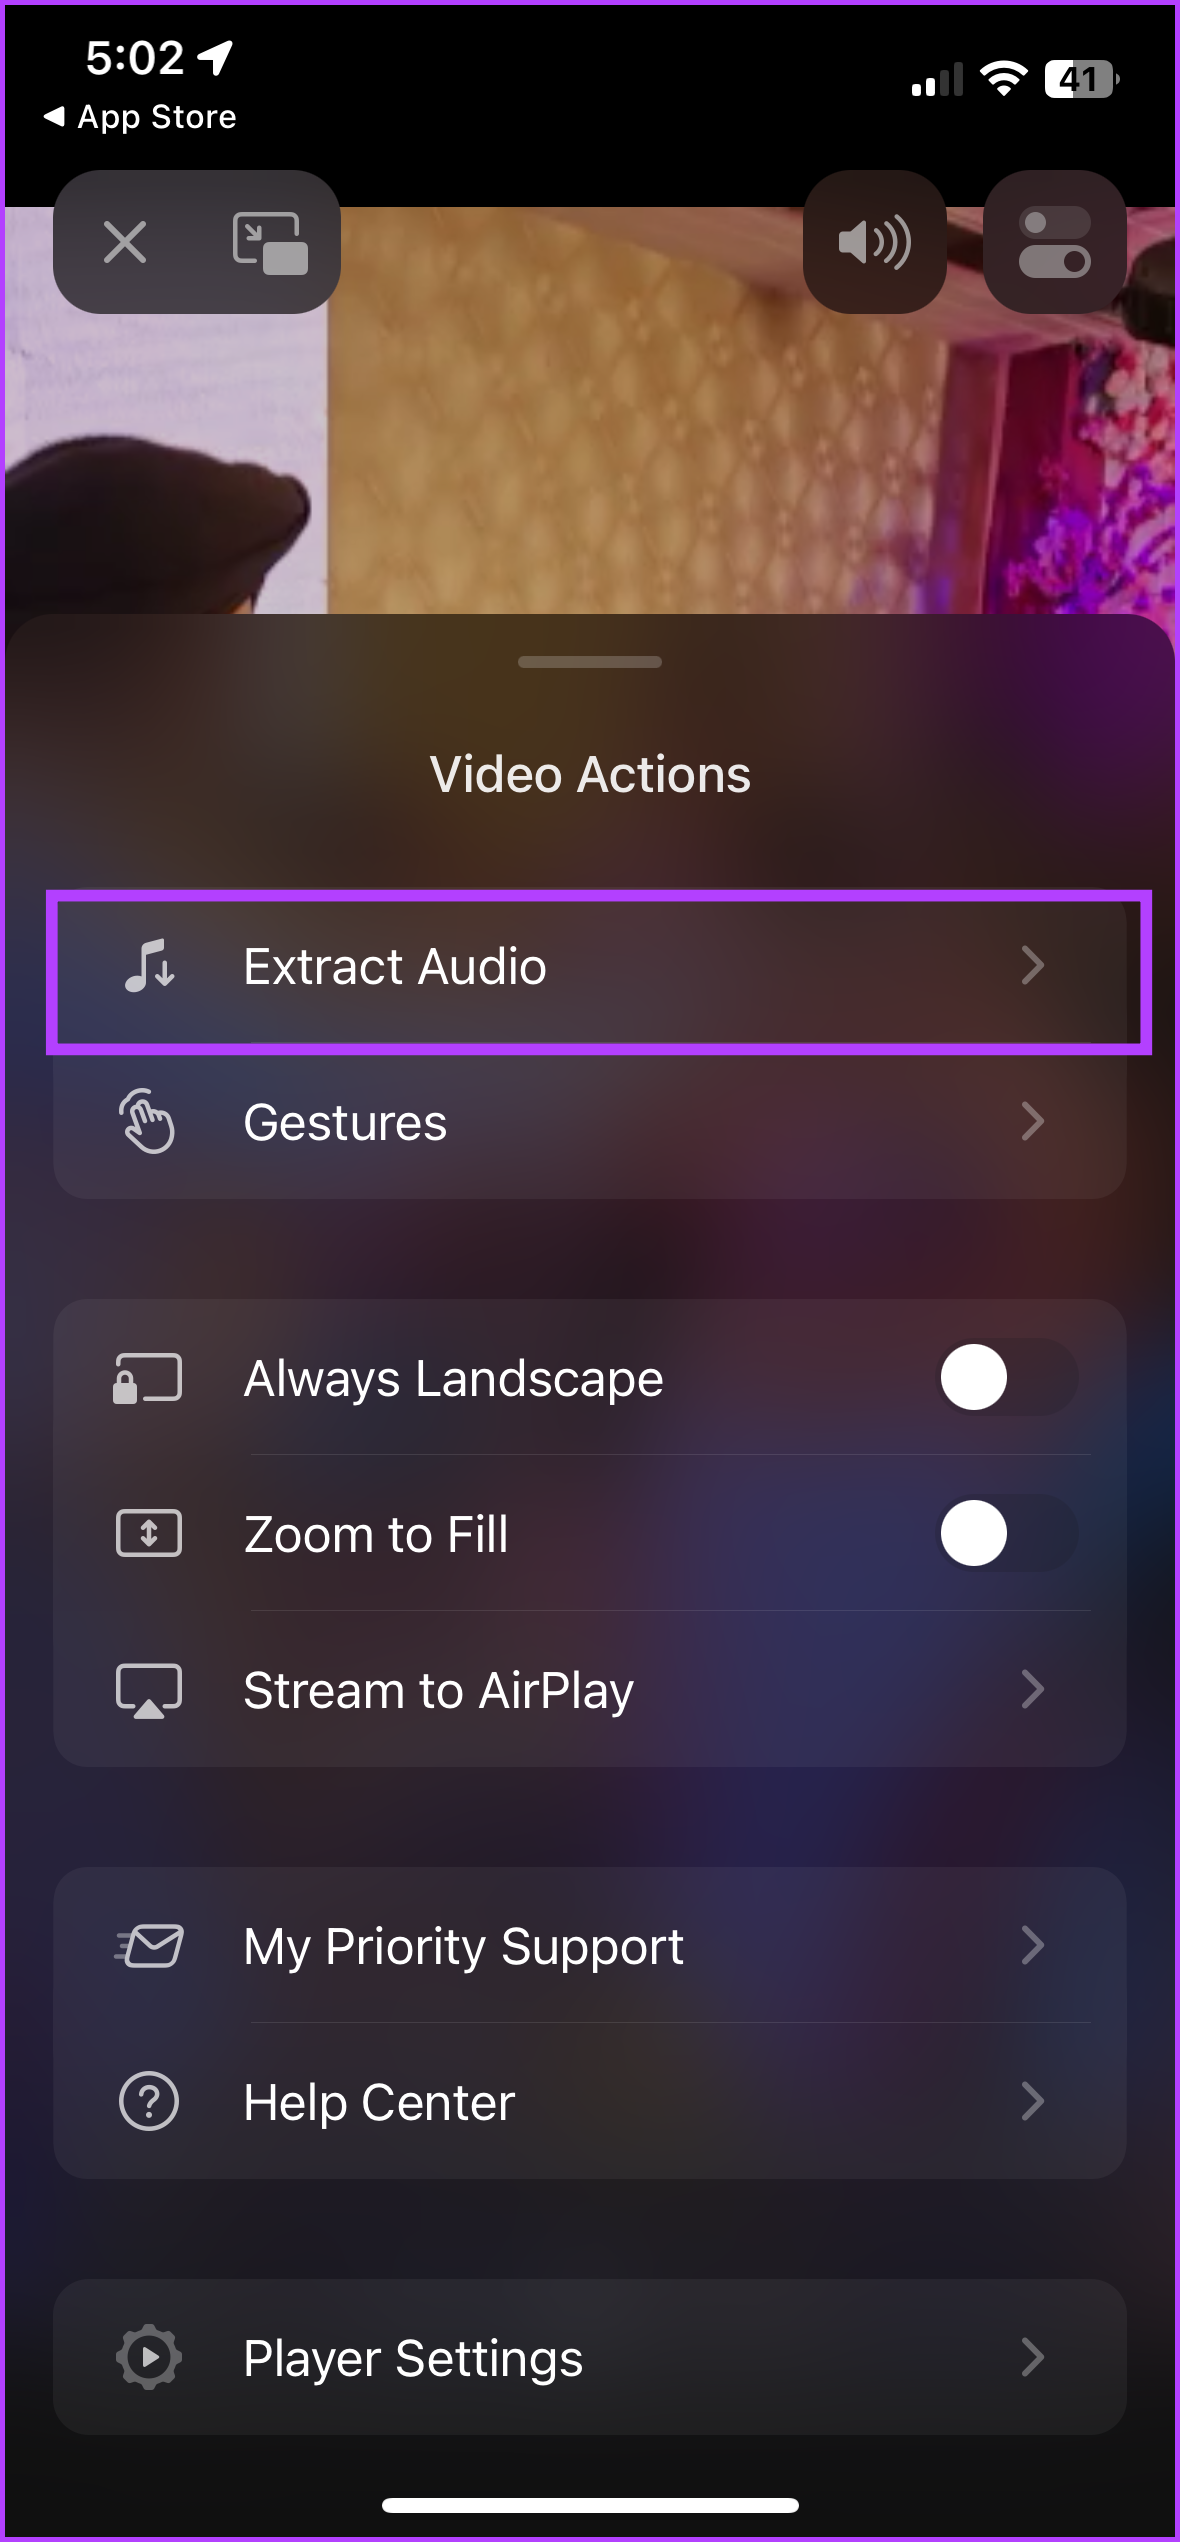 select Extract audio from video